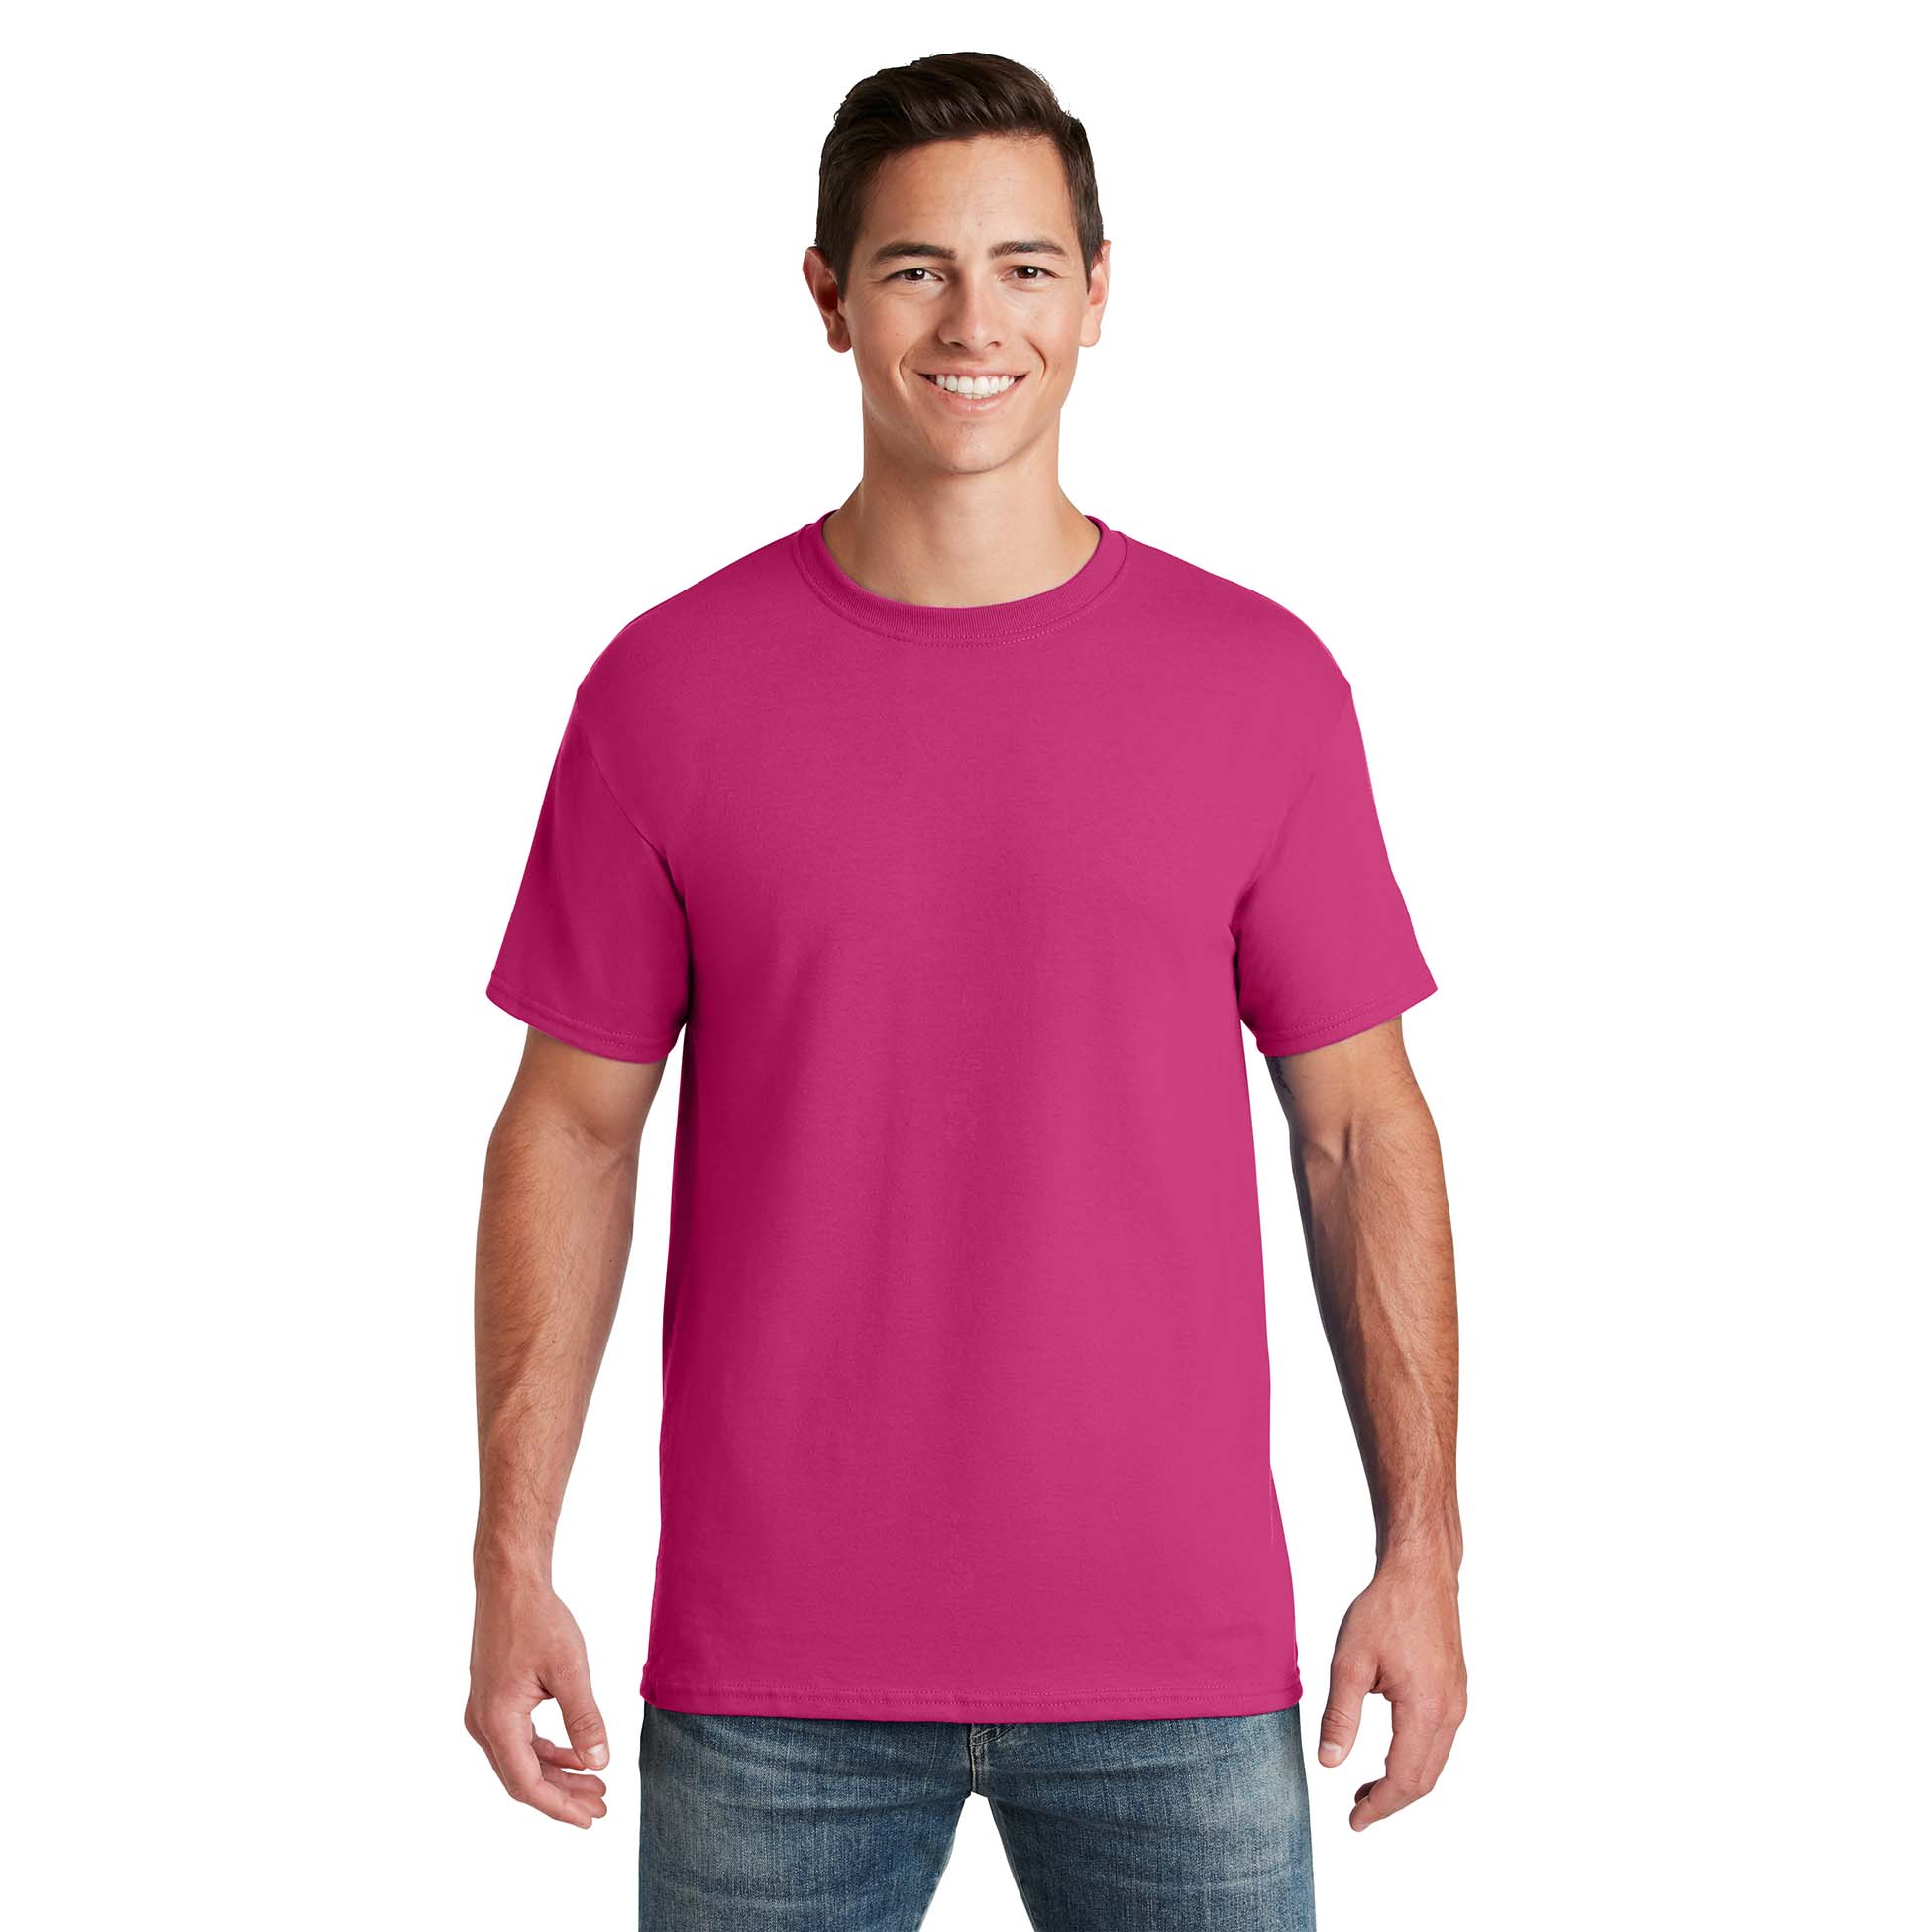 Jerzees 29M Dri-Power Active 50/50 Cotton/Poly T-Shirt - Cyber Pink ...